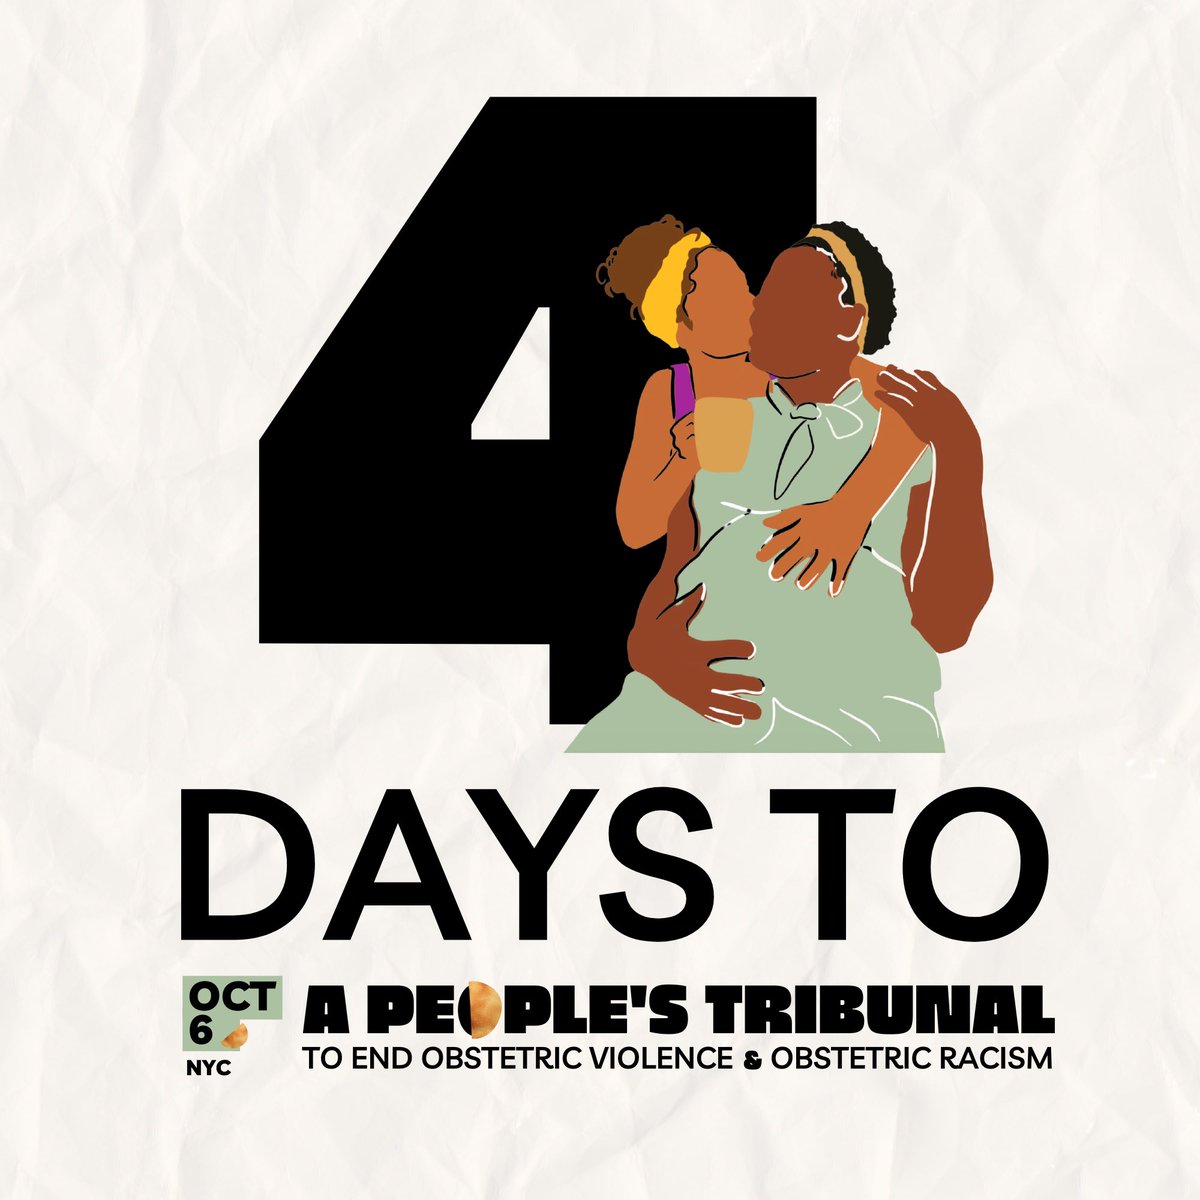 We’re ✨4 days✨ away from A People’s Tribunal in NYC!

There’s still time to join us + to take action for ALL birthing people and families!

#PeoplesTribunal23
#BirthJustice